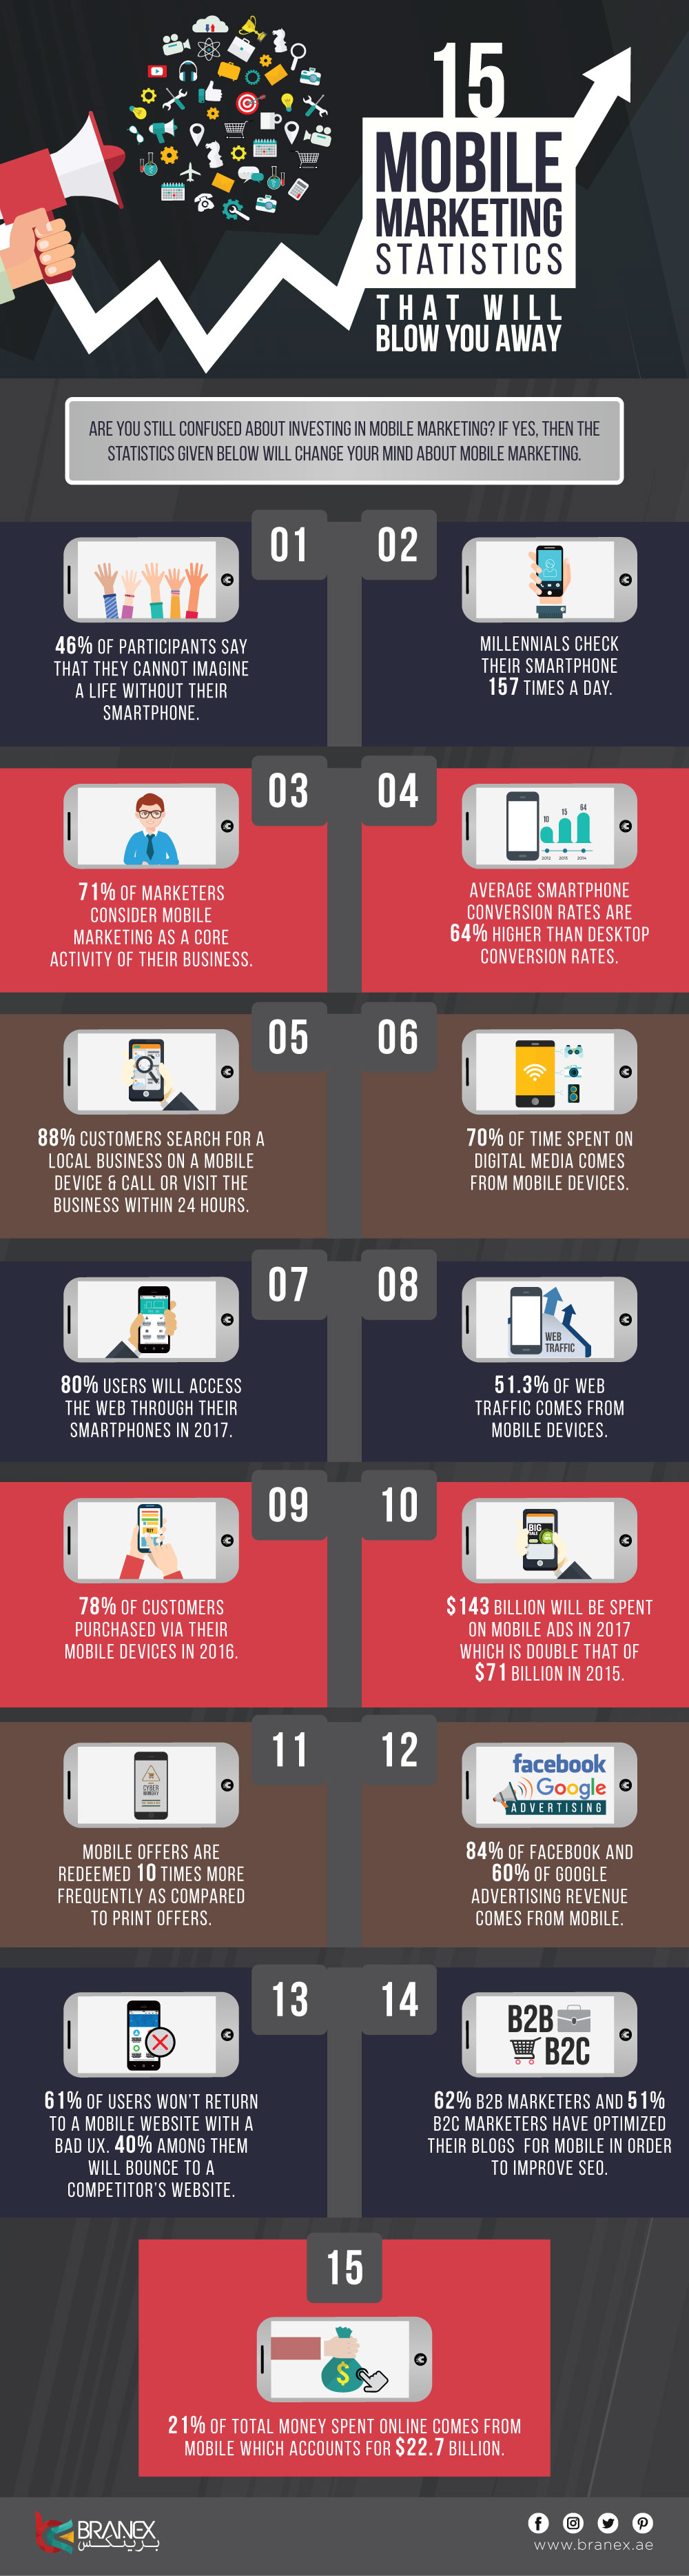 15-Mobile-Marketing-Stats-That-Will-Blow-You-Away.jpg